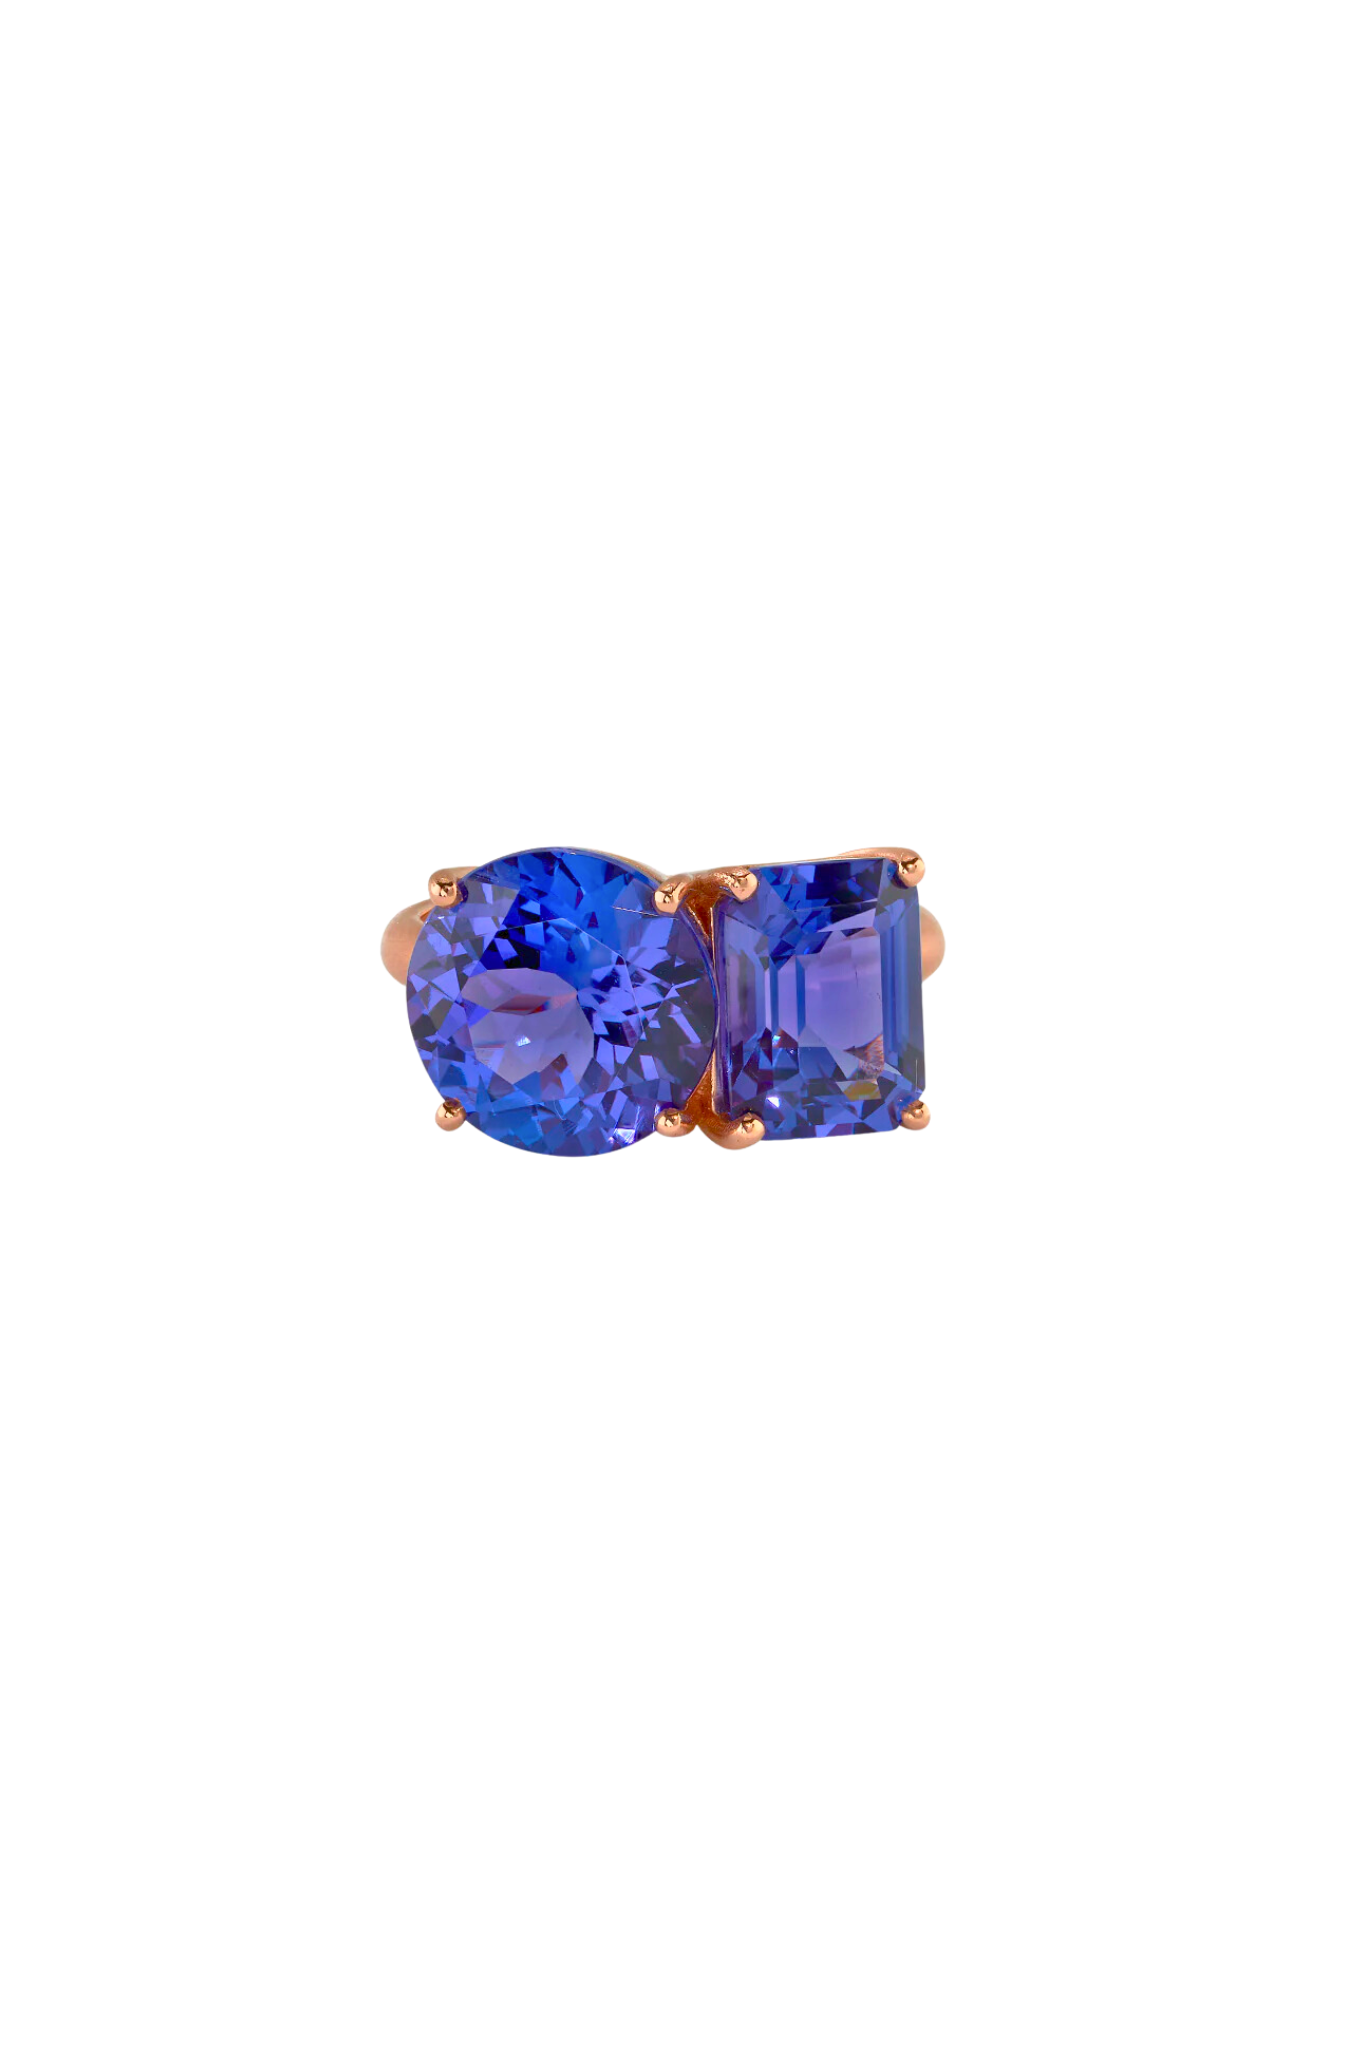 Irene Neuwirth Gemmy Gem Double Stone One of a Kind 18k Rose Gold Ring set with Tanzanite (18.09 cts)